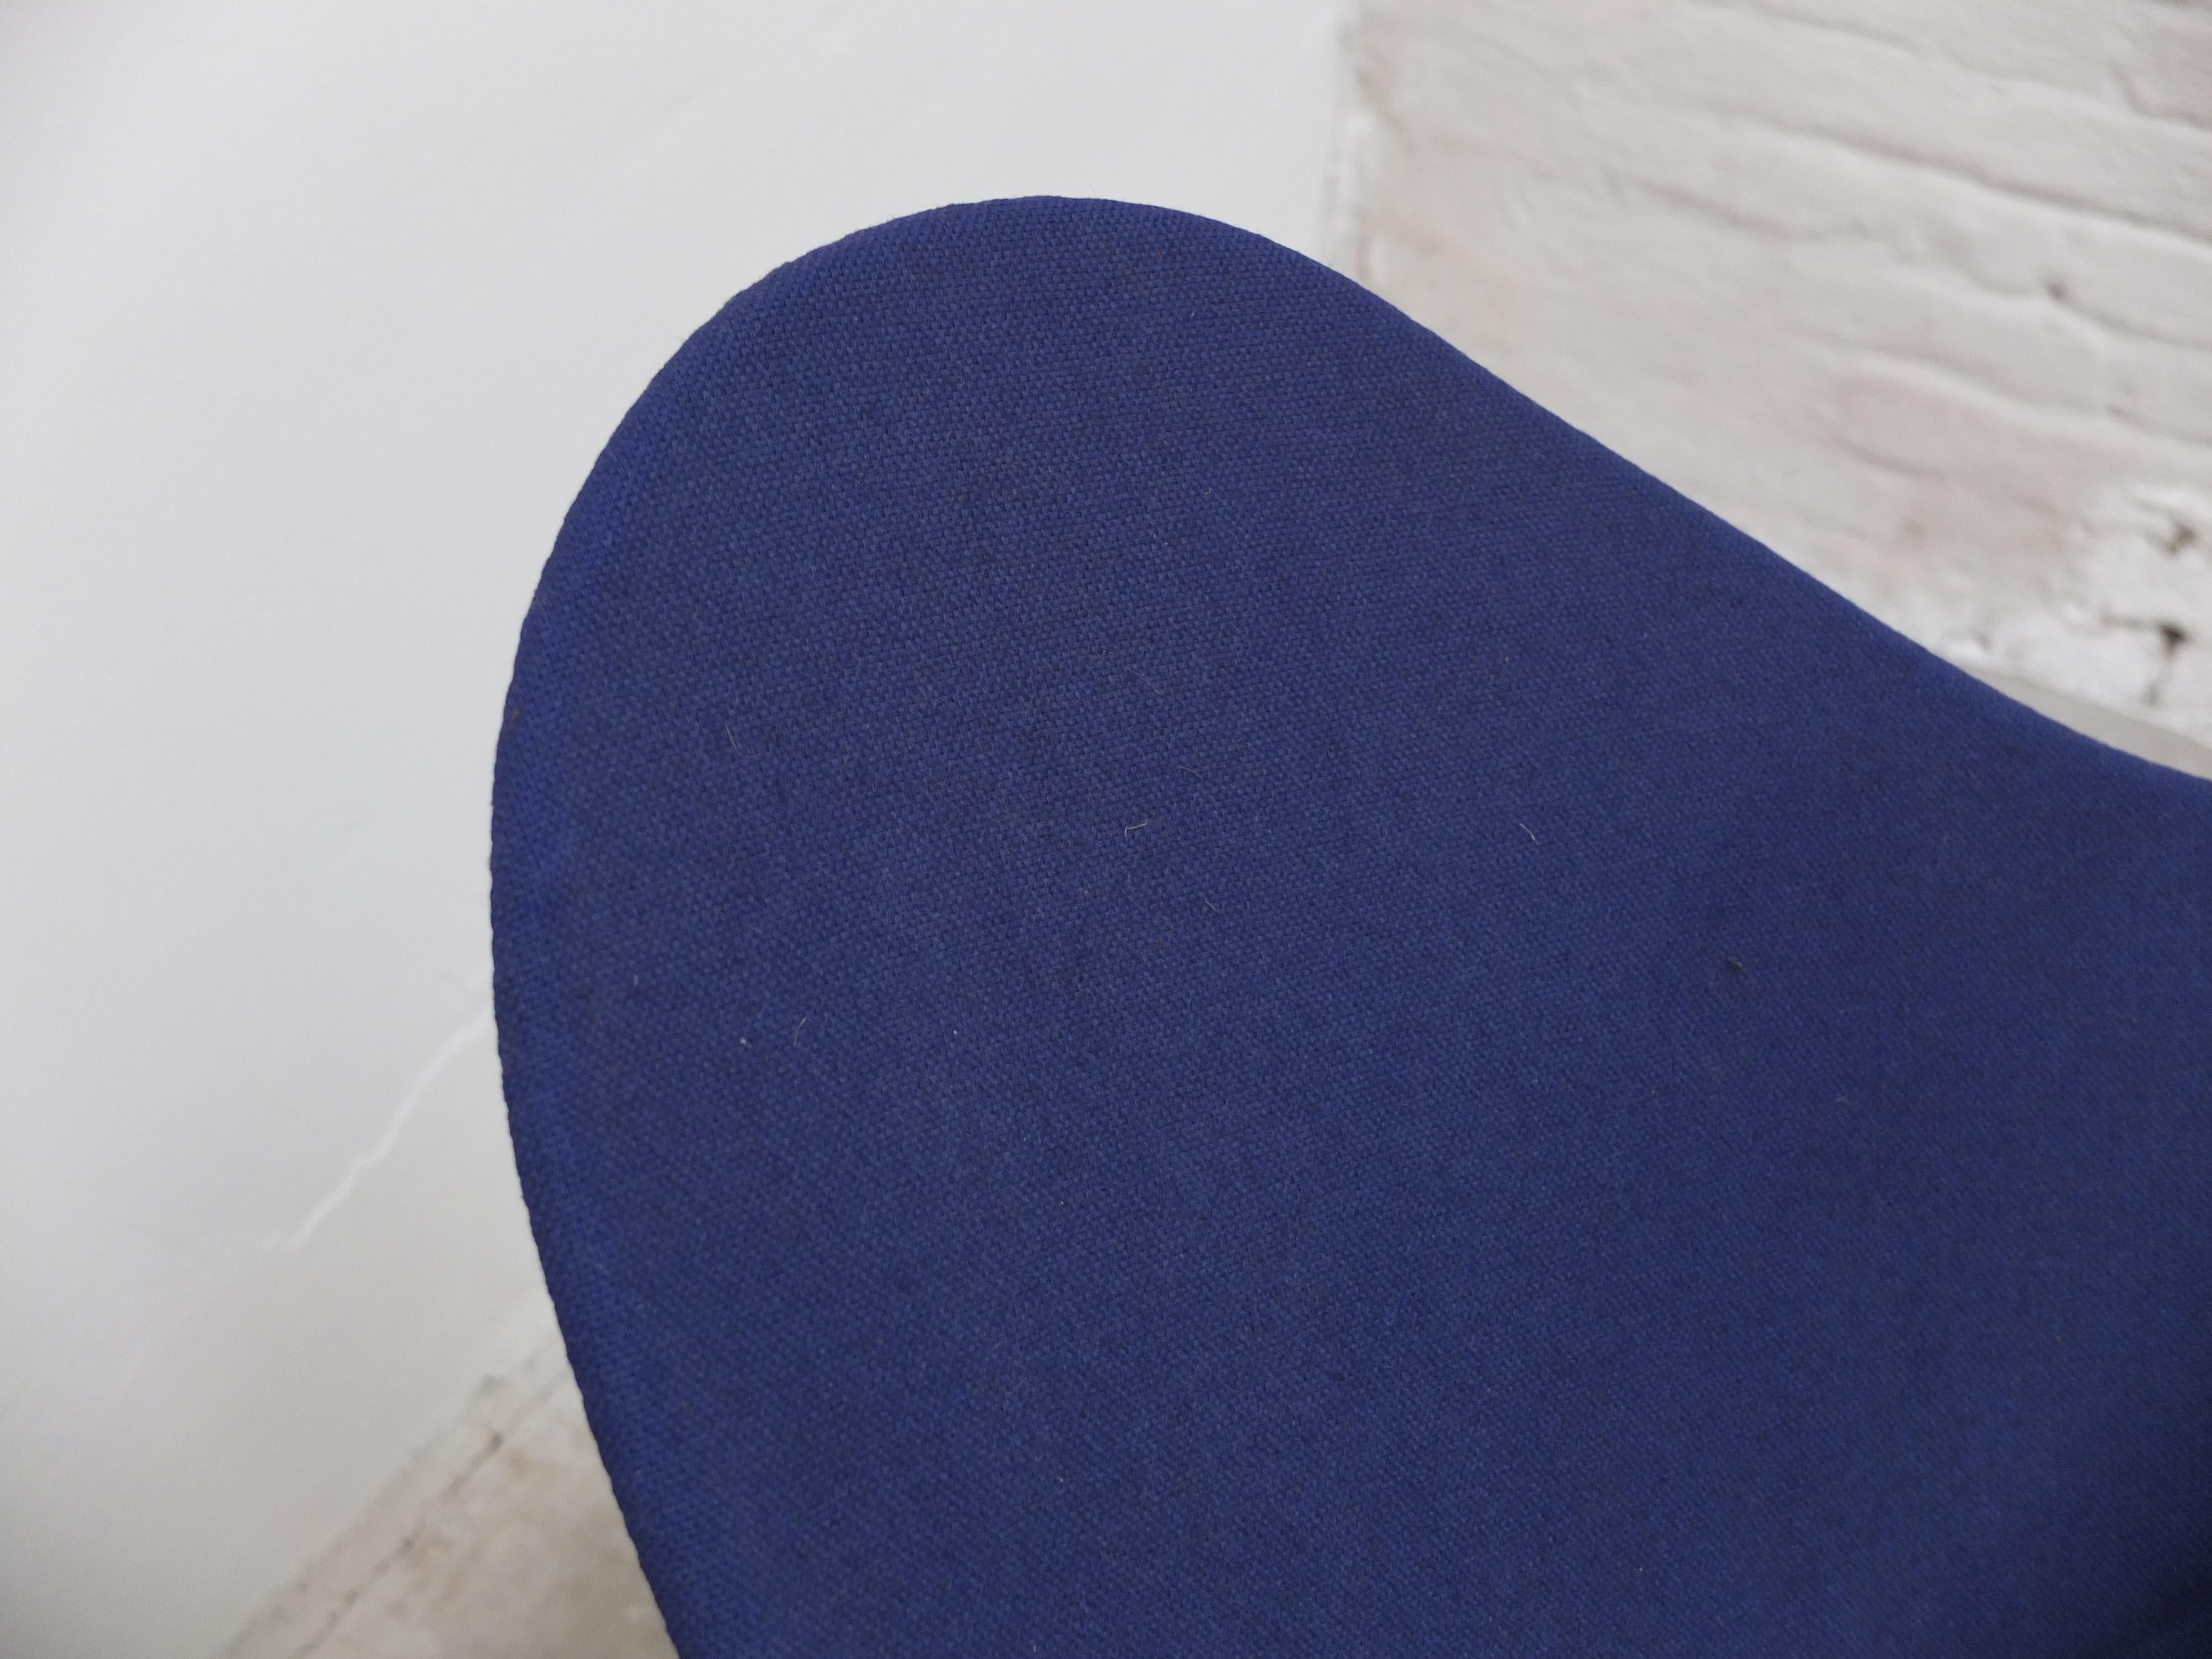 Iconic 'Heart Cone' Chair by Verner Panton for Plus Linje, 1958 For Sale 1